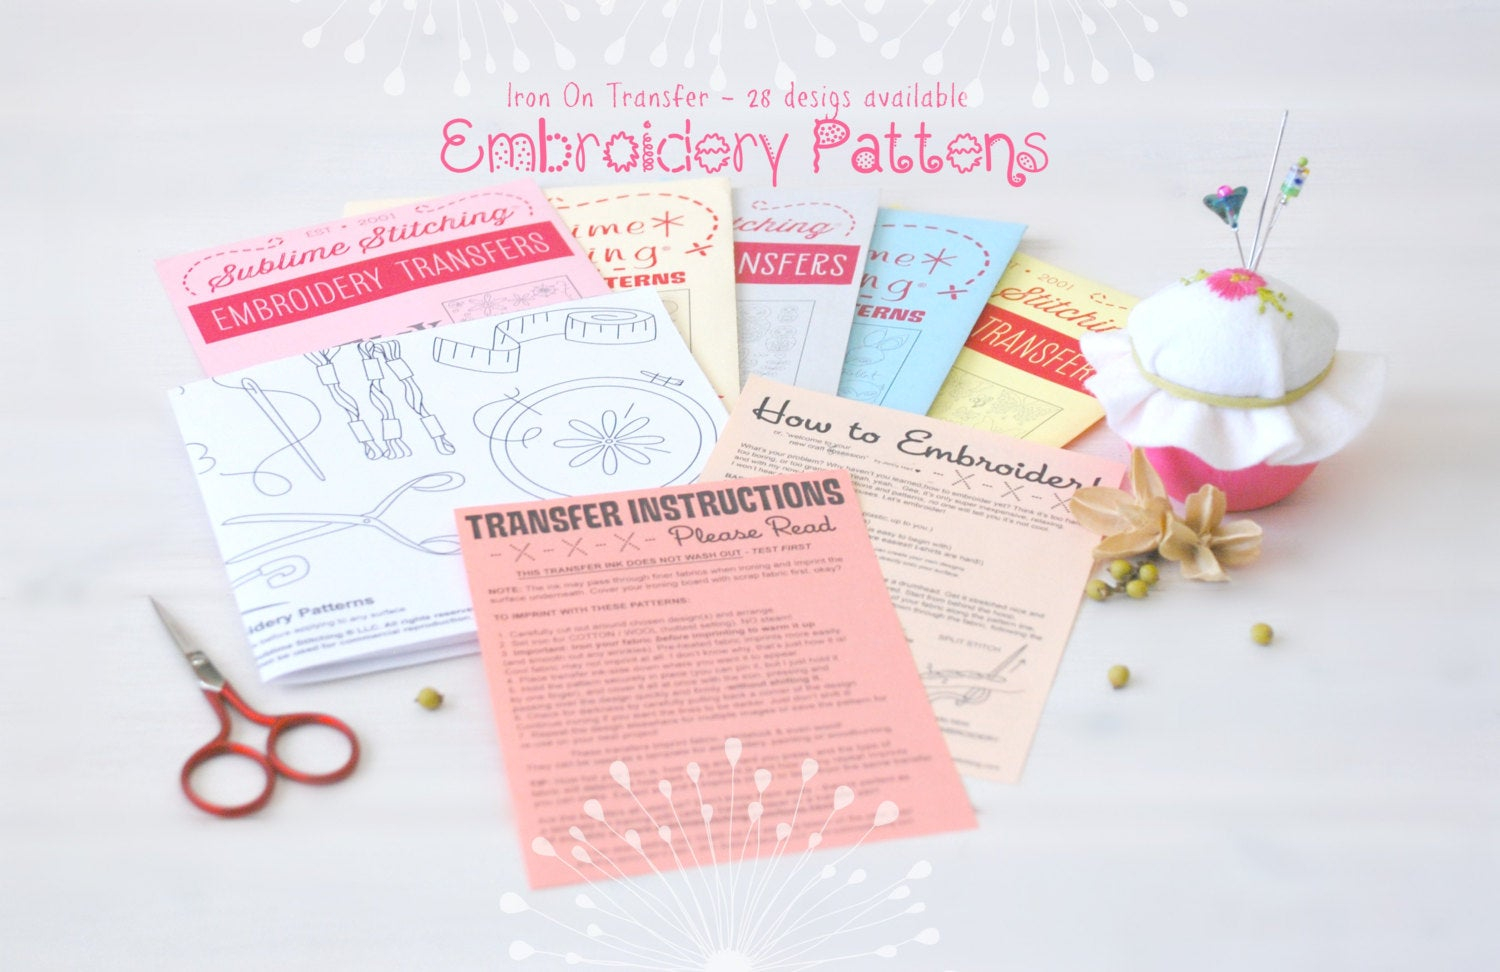 Iron On Patterns For Embroidery Embroidery Patterns Iron On Patterns Diy Embroidery Patterns